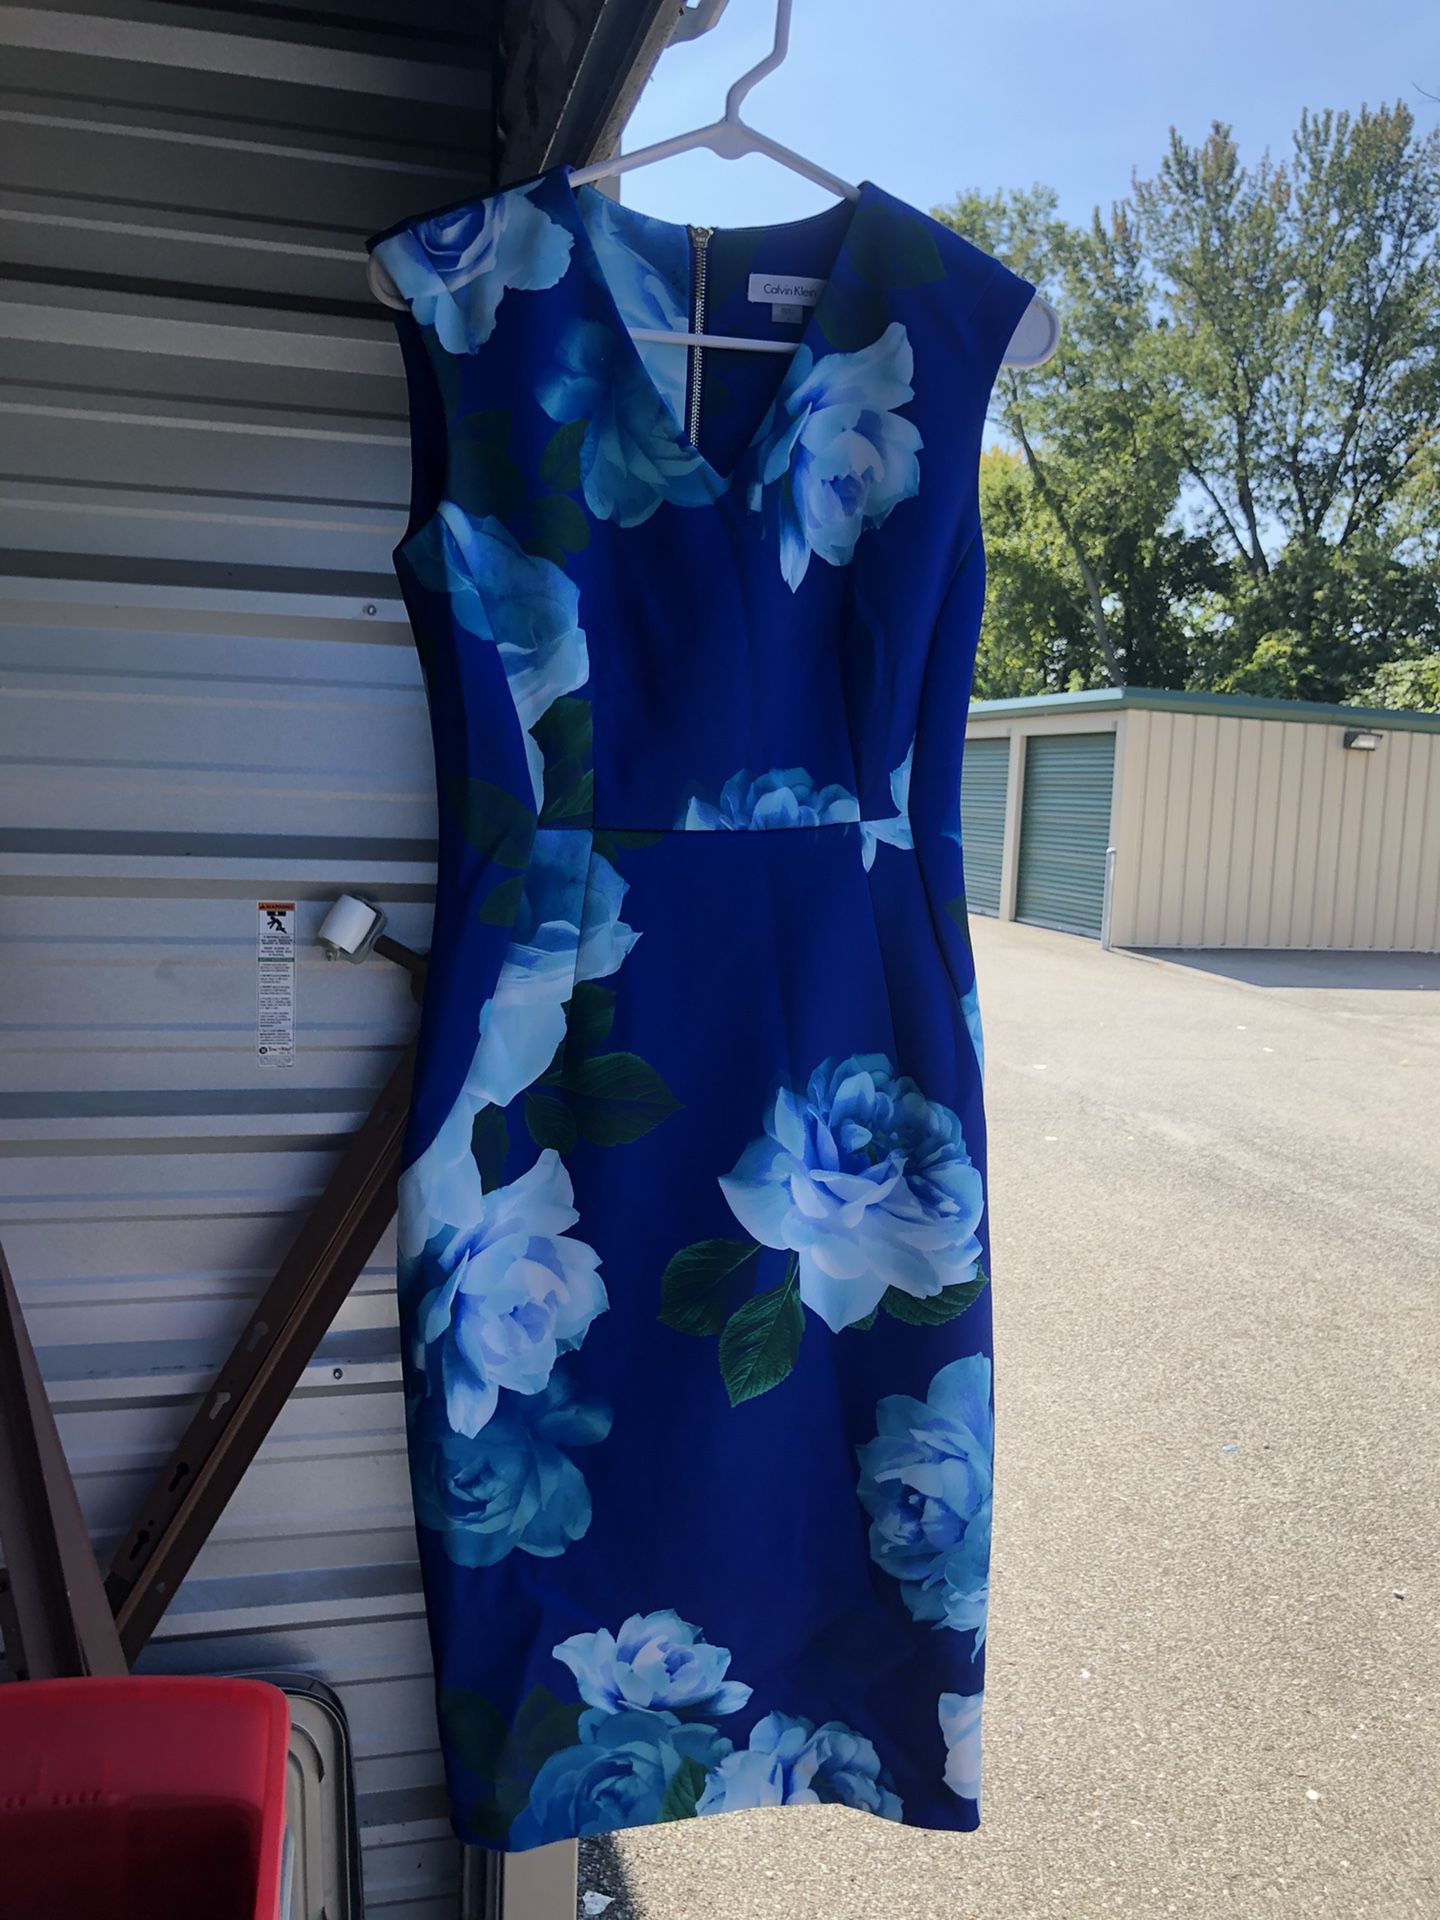 Calvin Klein blue floral sleeveless dress, zip up in back, lady’s size 4